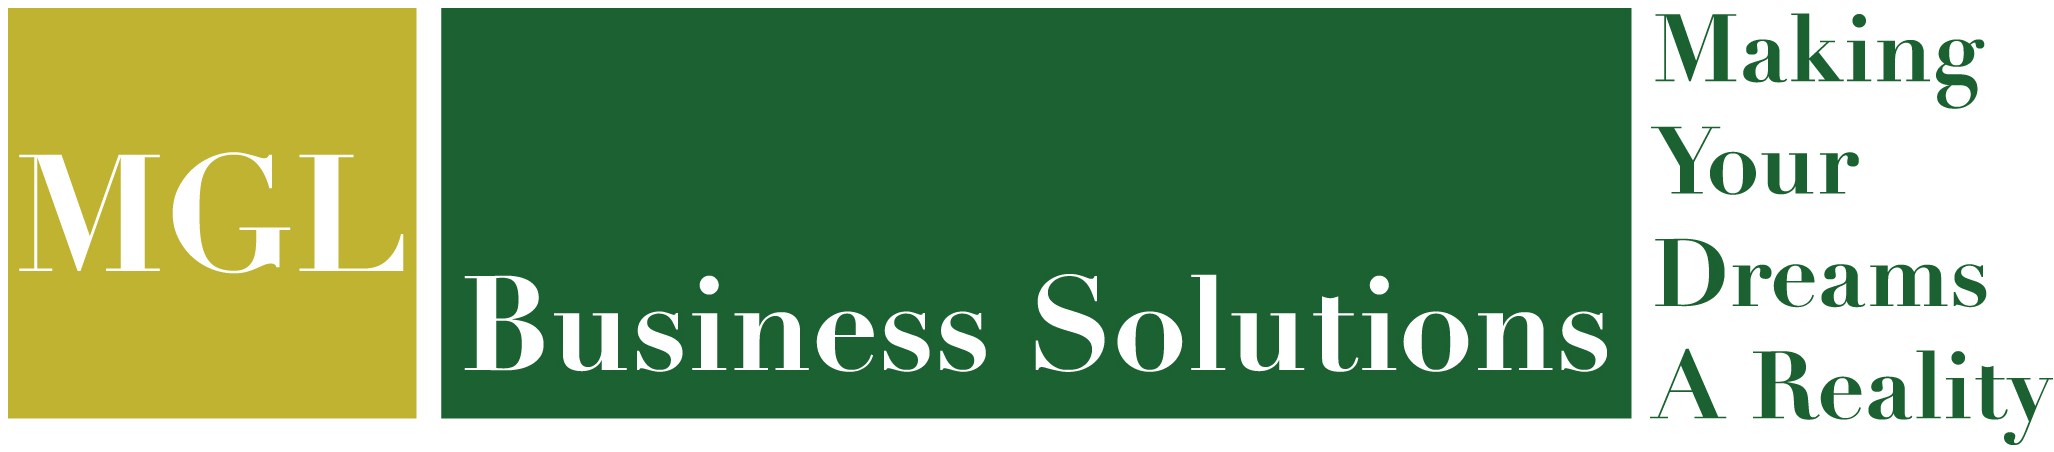 MGL Business Solutions